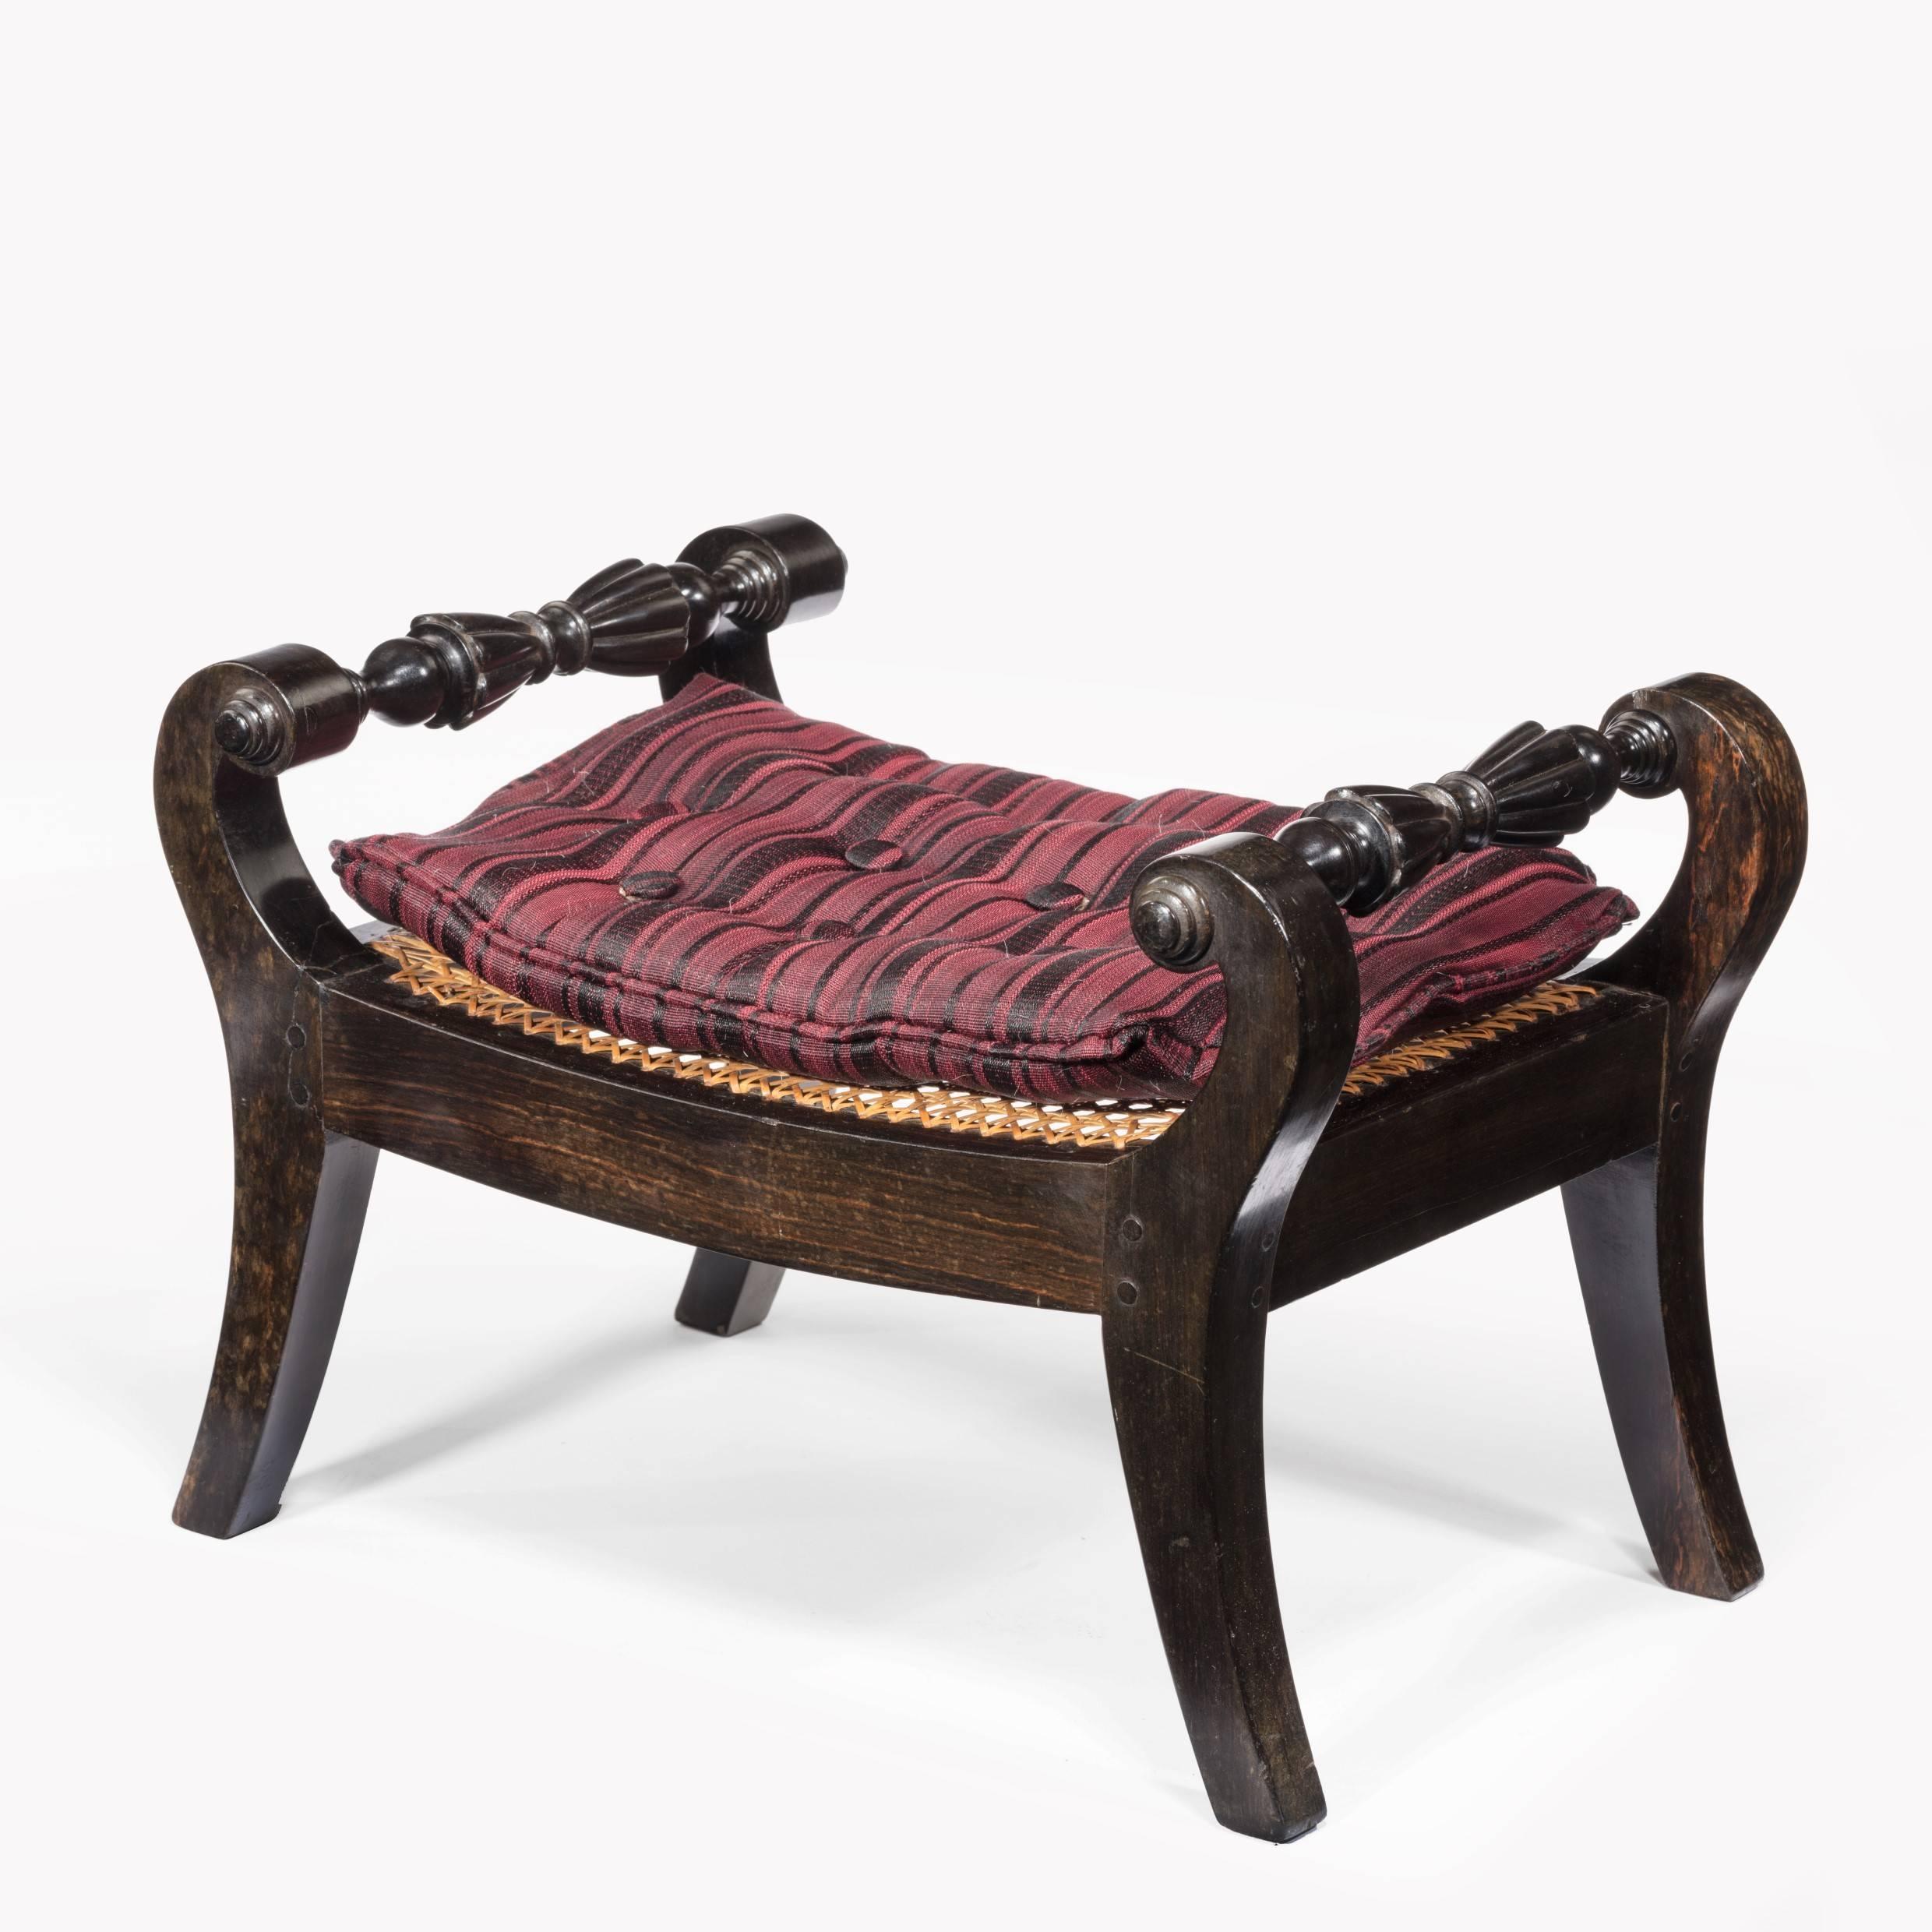 A pair of Anglo-Indian solid ebony footstools, each with two scrolling and reeded rails, cane seats and later cushions, circa 1810.